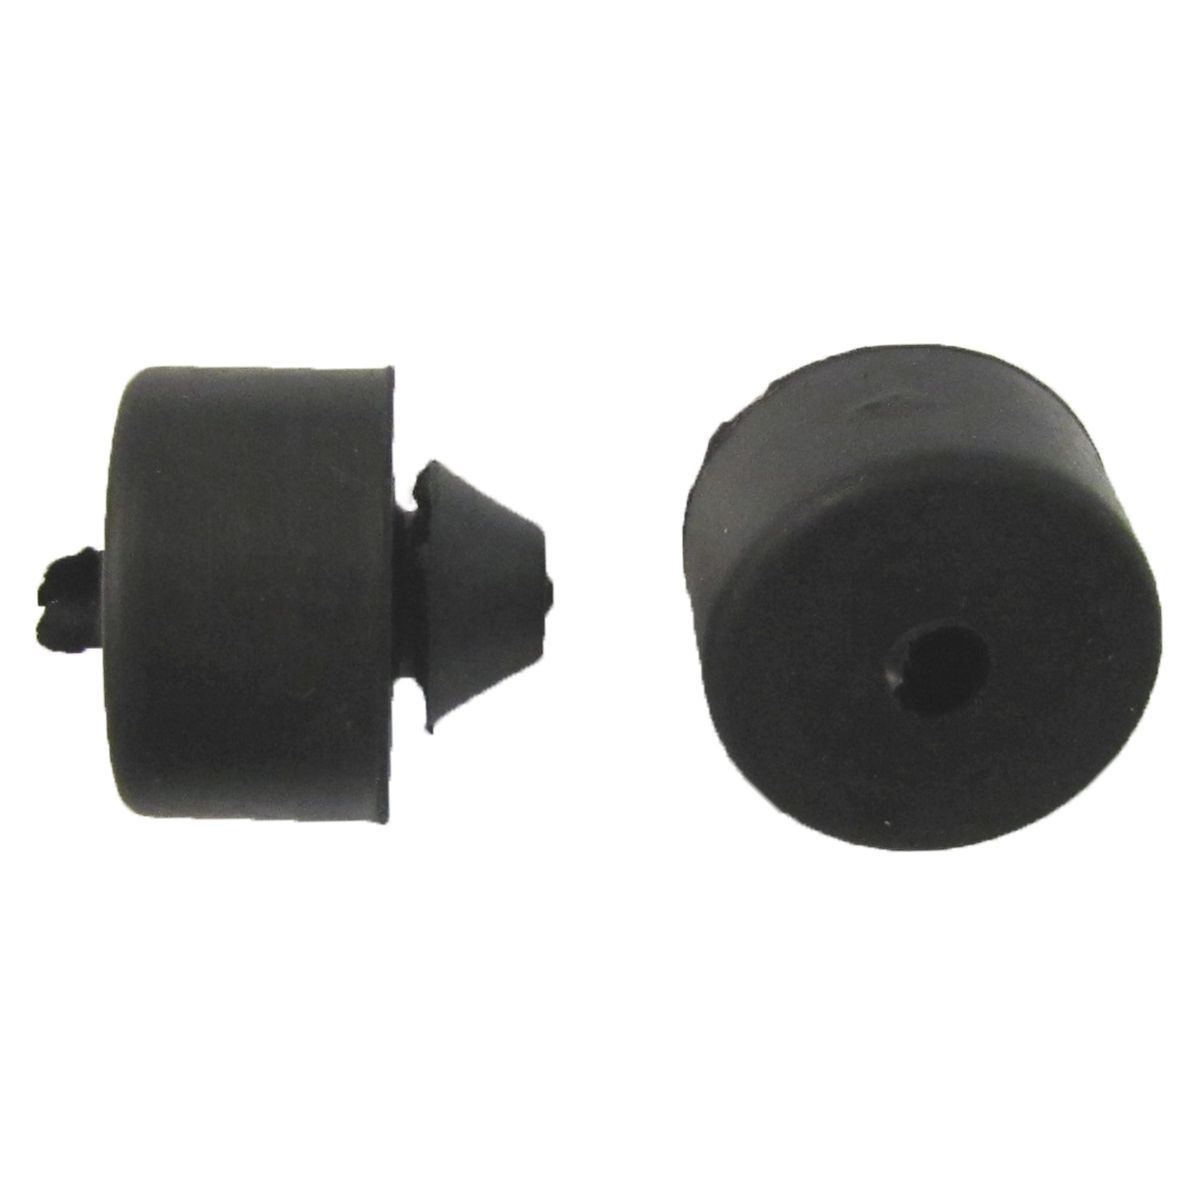 AW Motorcycle Parts. Stand Centre Rubber Round O.D 25mm and Depth 15mm ...